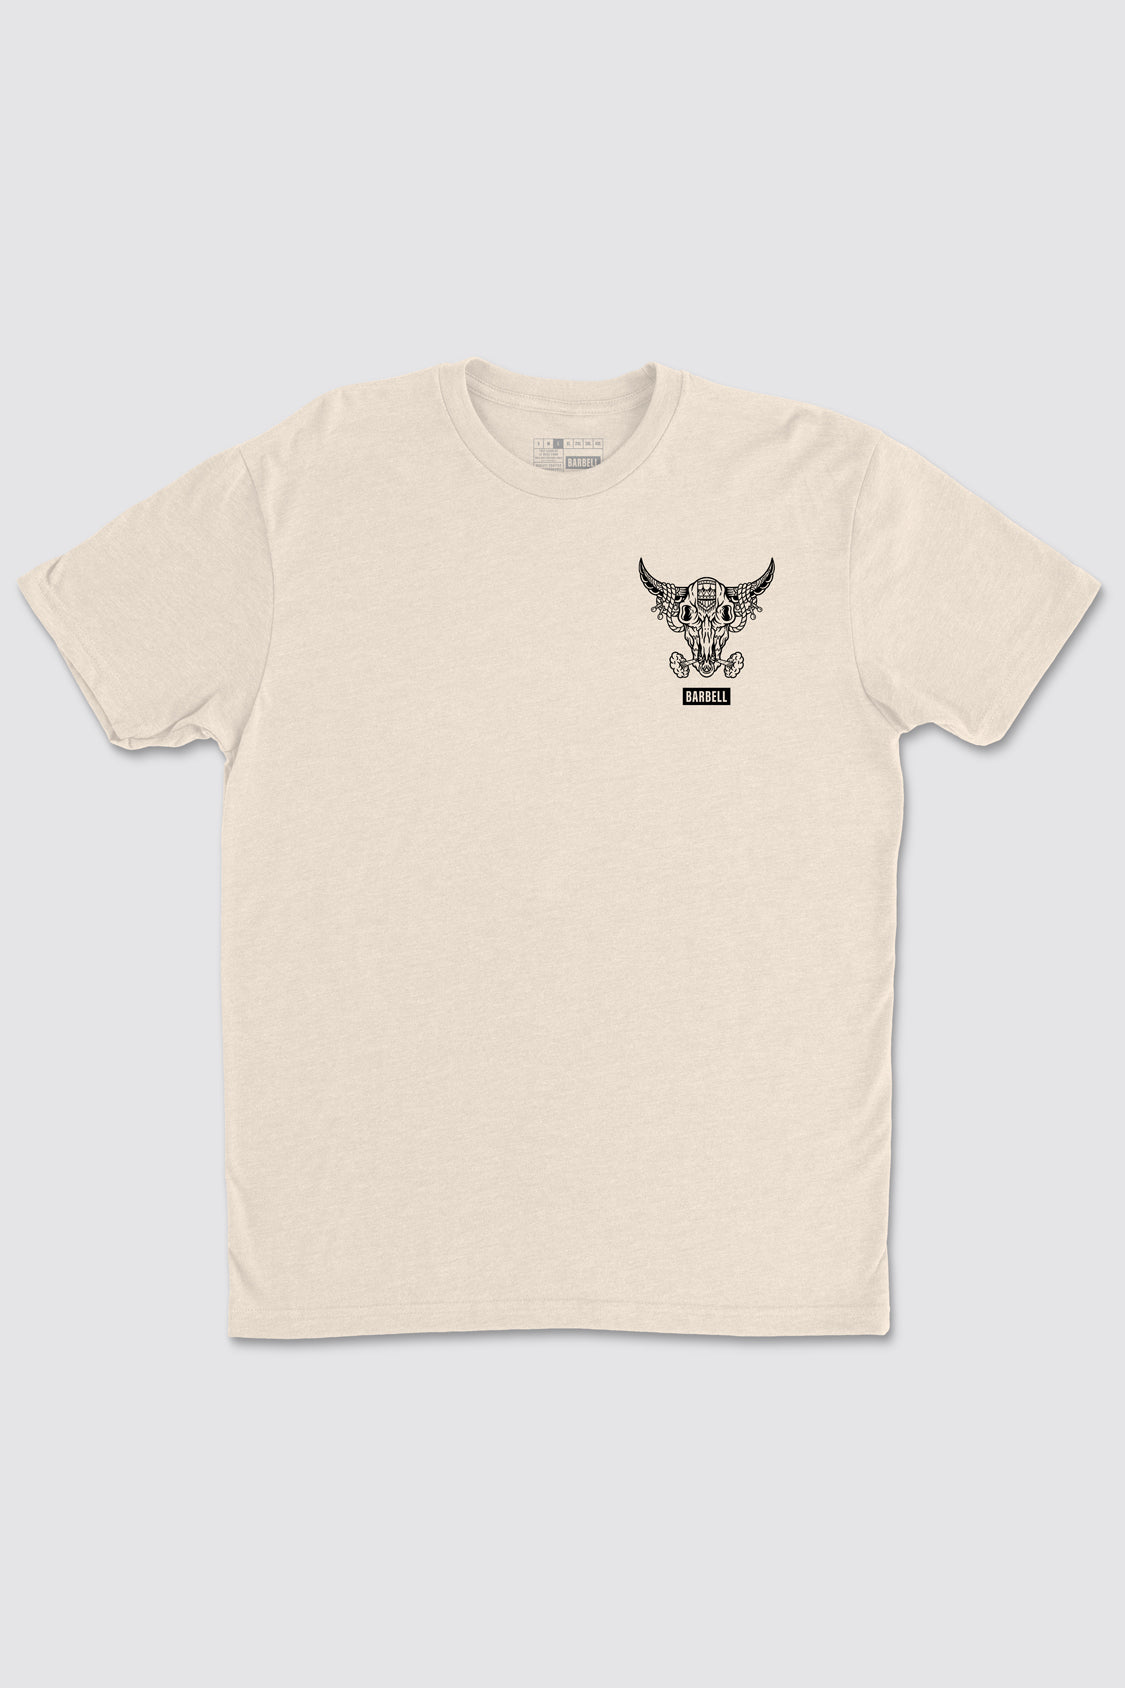 Longhorn Tee-Cream - photo from front #color_cream